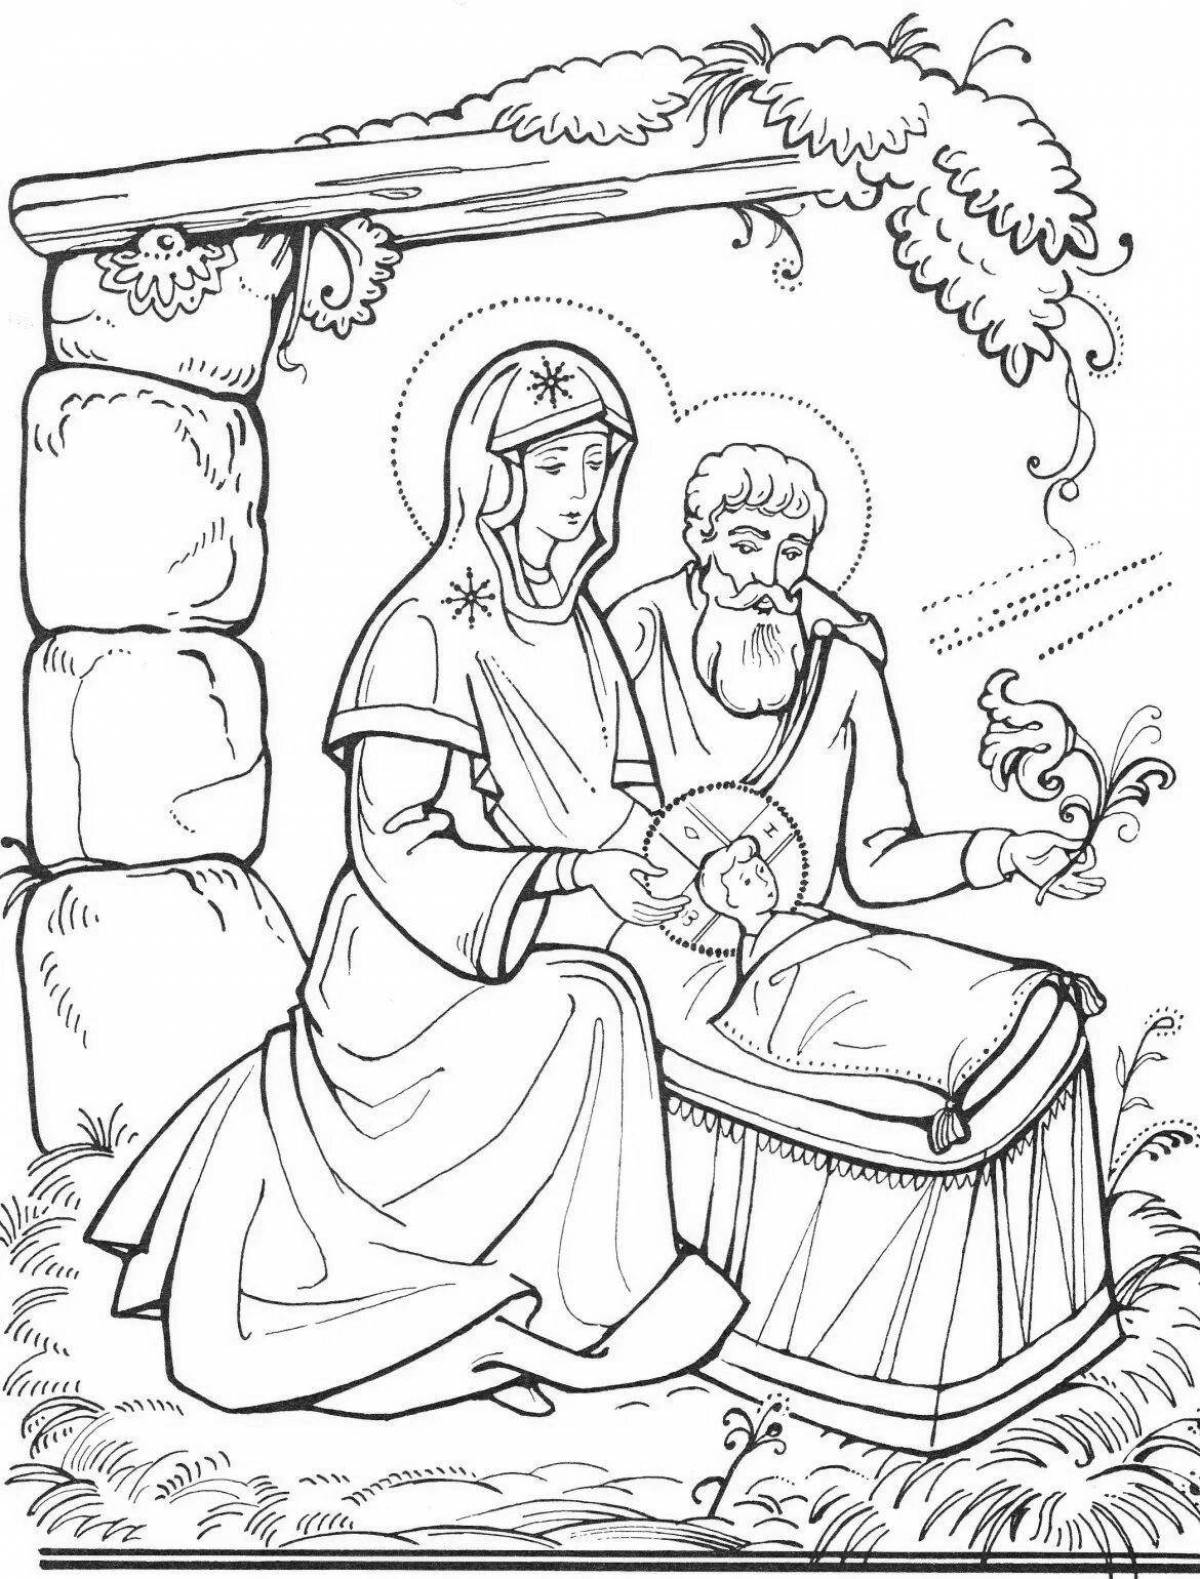 Charming coloring of the birth of jesus christ for children